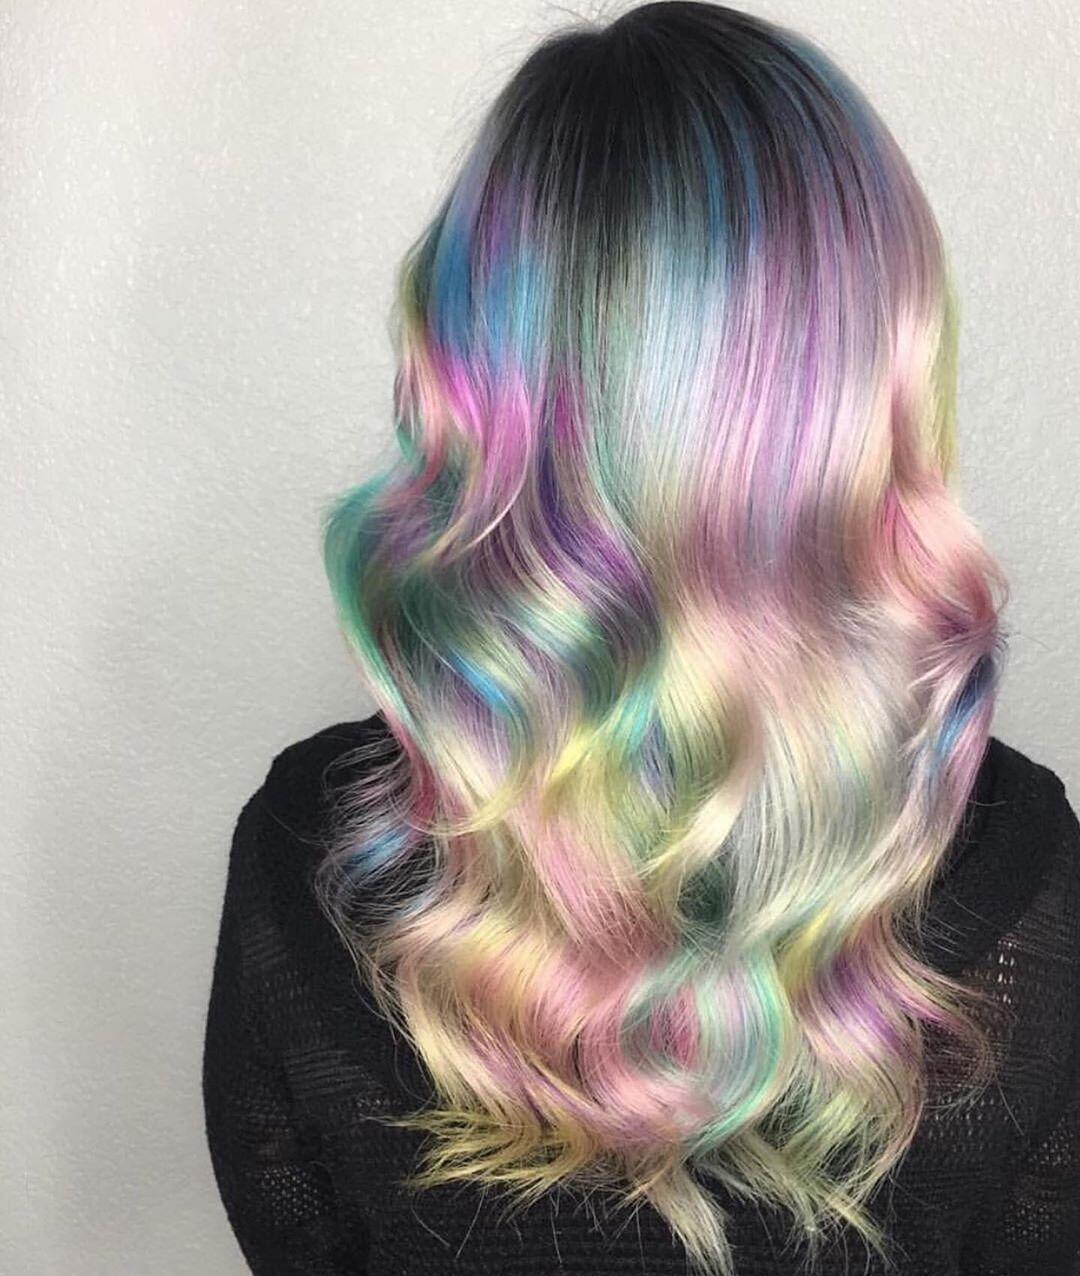 Holographic Hair: The Most Adorable Hair Trend in 2020